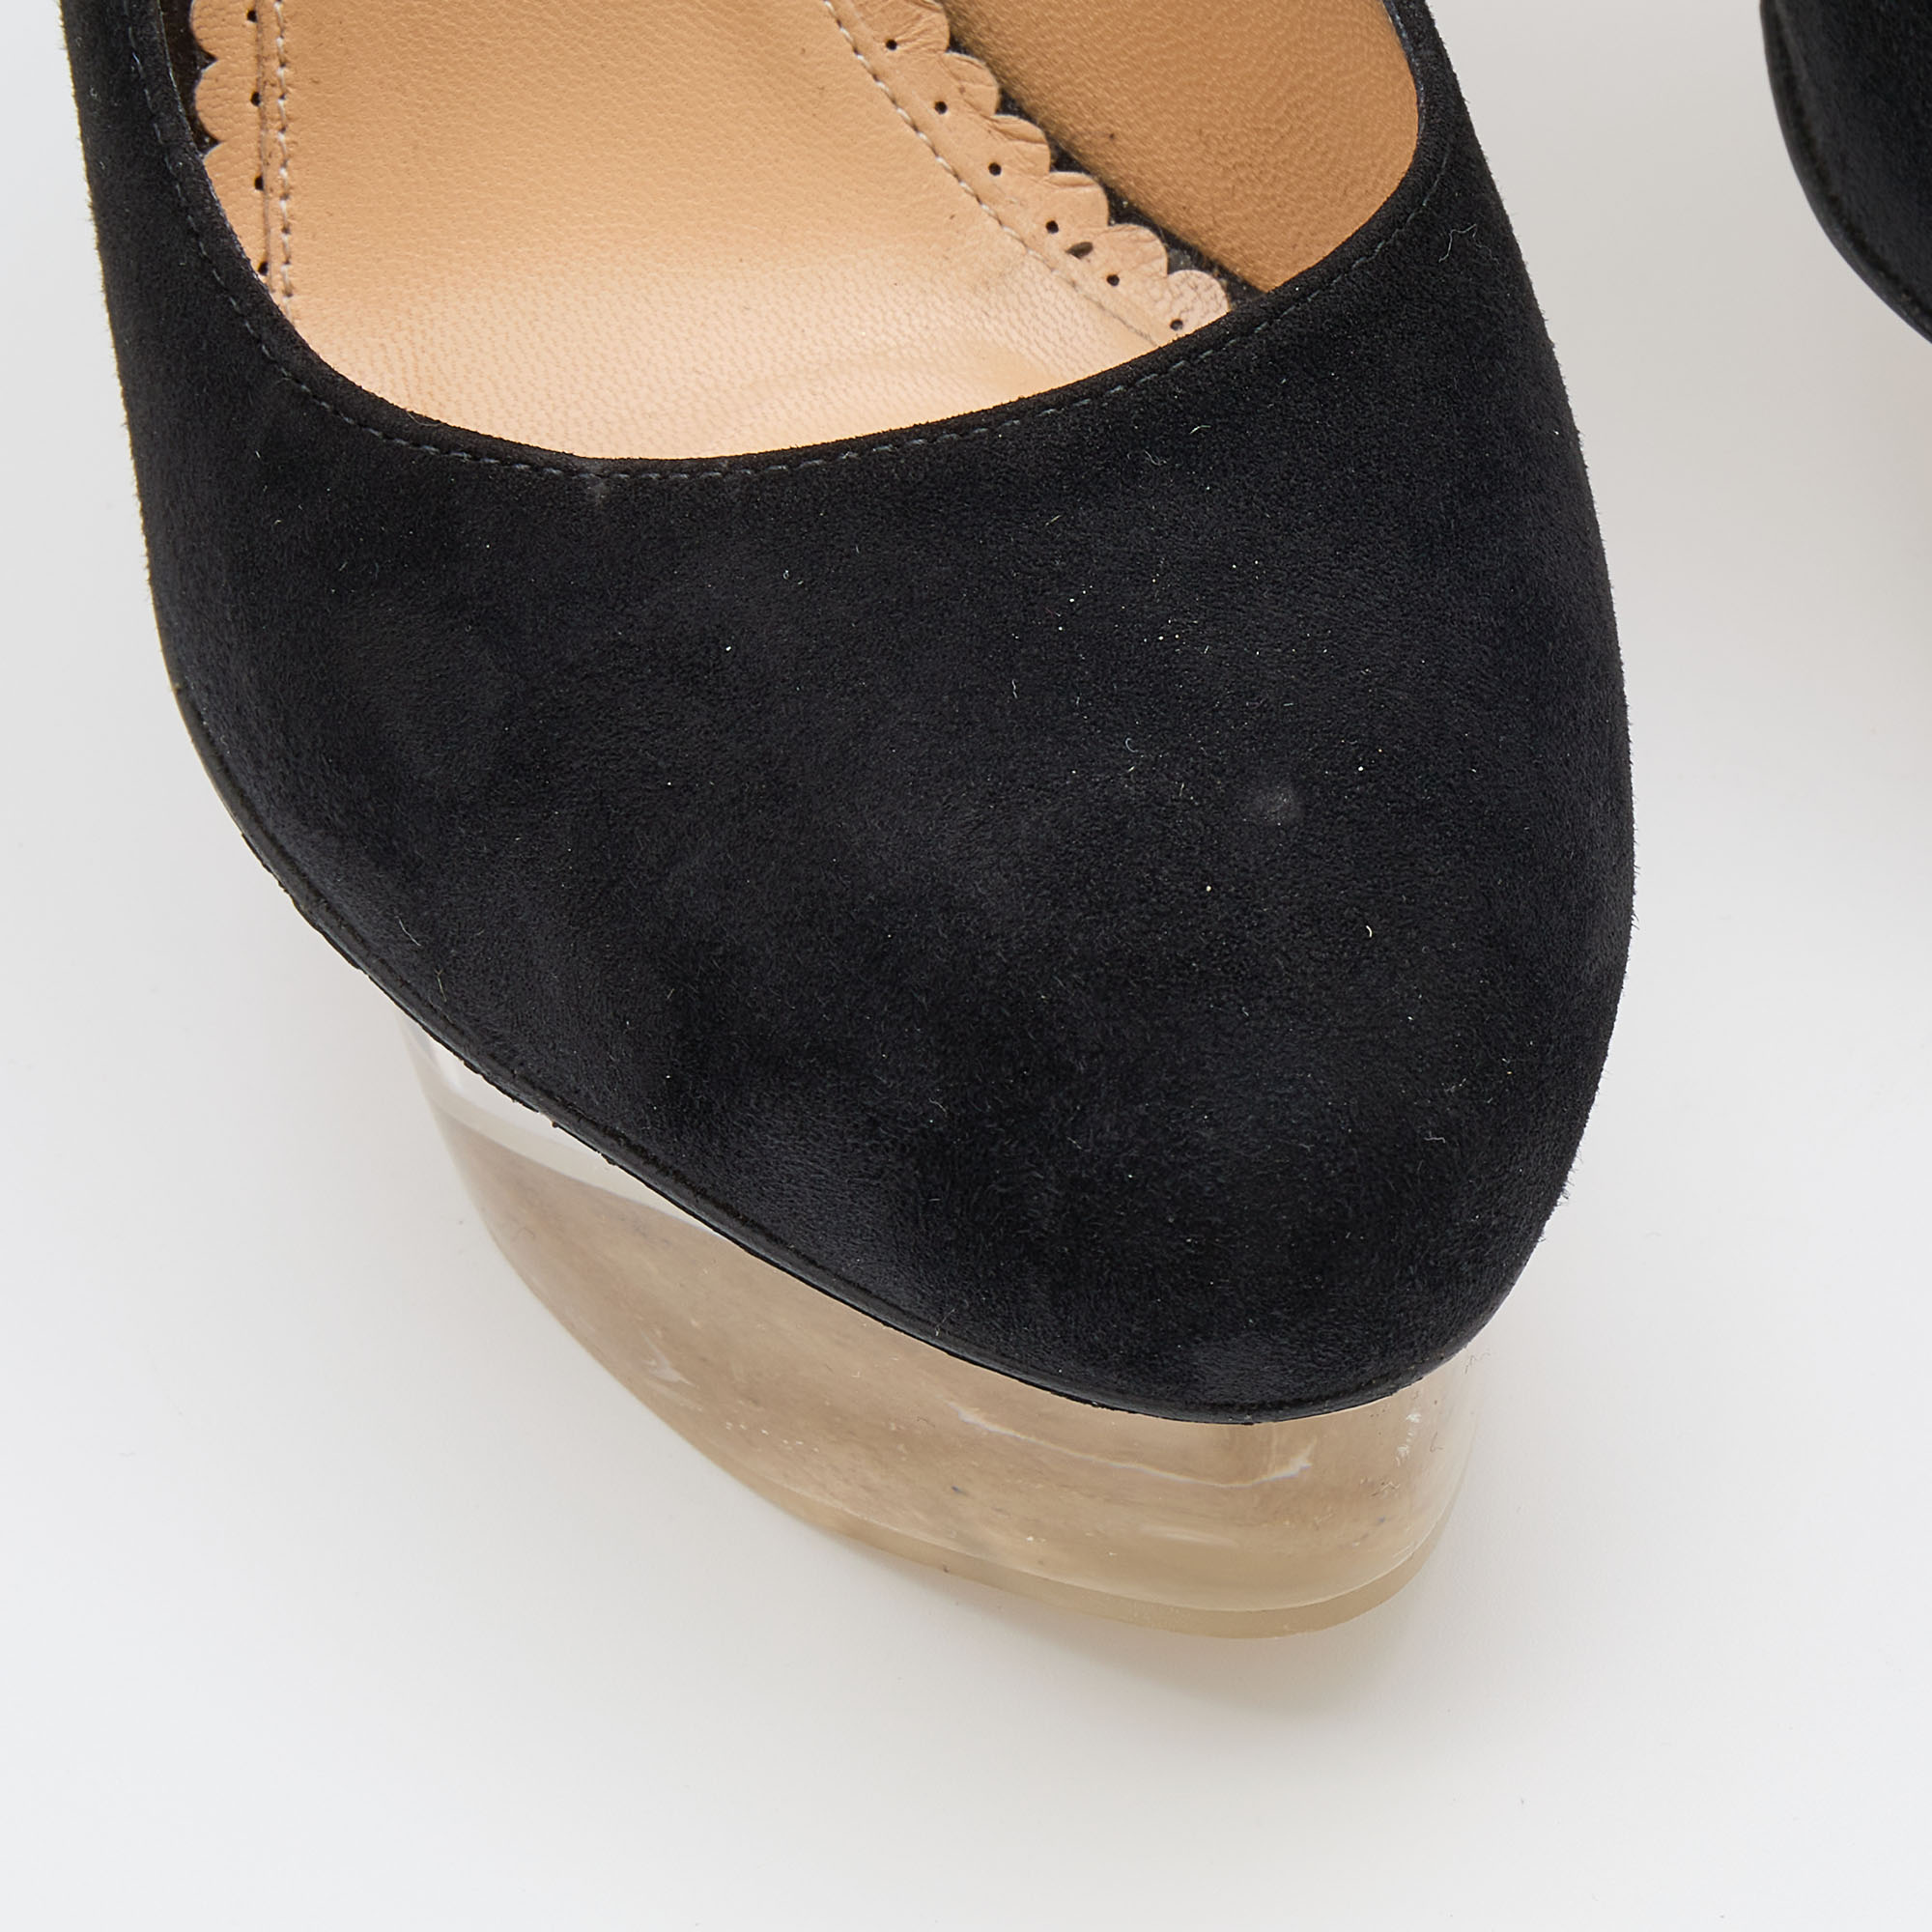 Charlotte Olympia Black Suede Dolly Platform Pumps Size 38